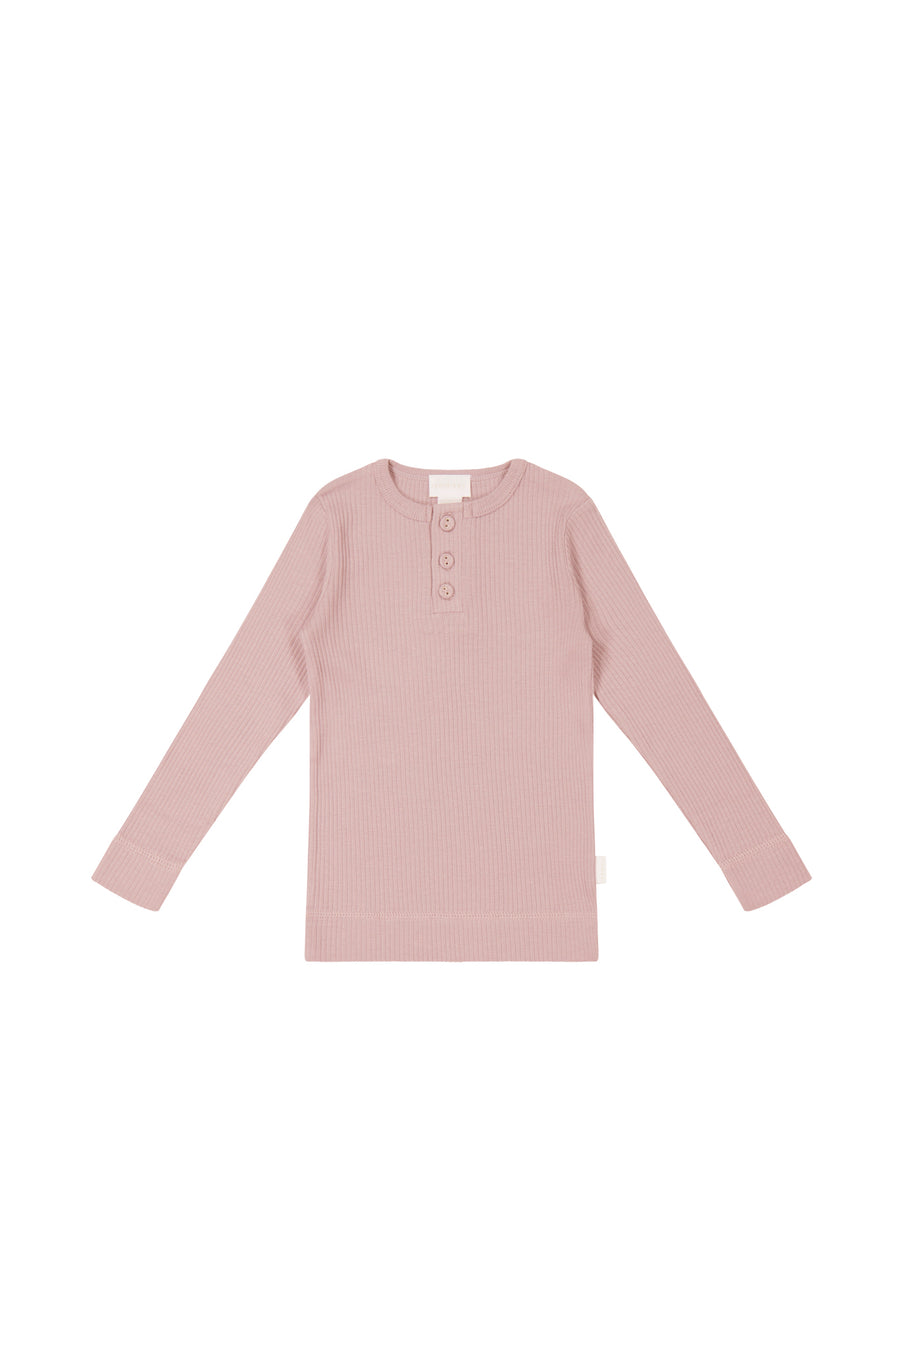 Organic Cotton Modal Long Sleeve Henley - Doll Childrens Top from Jamie Kay NZ